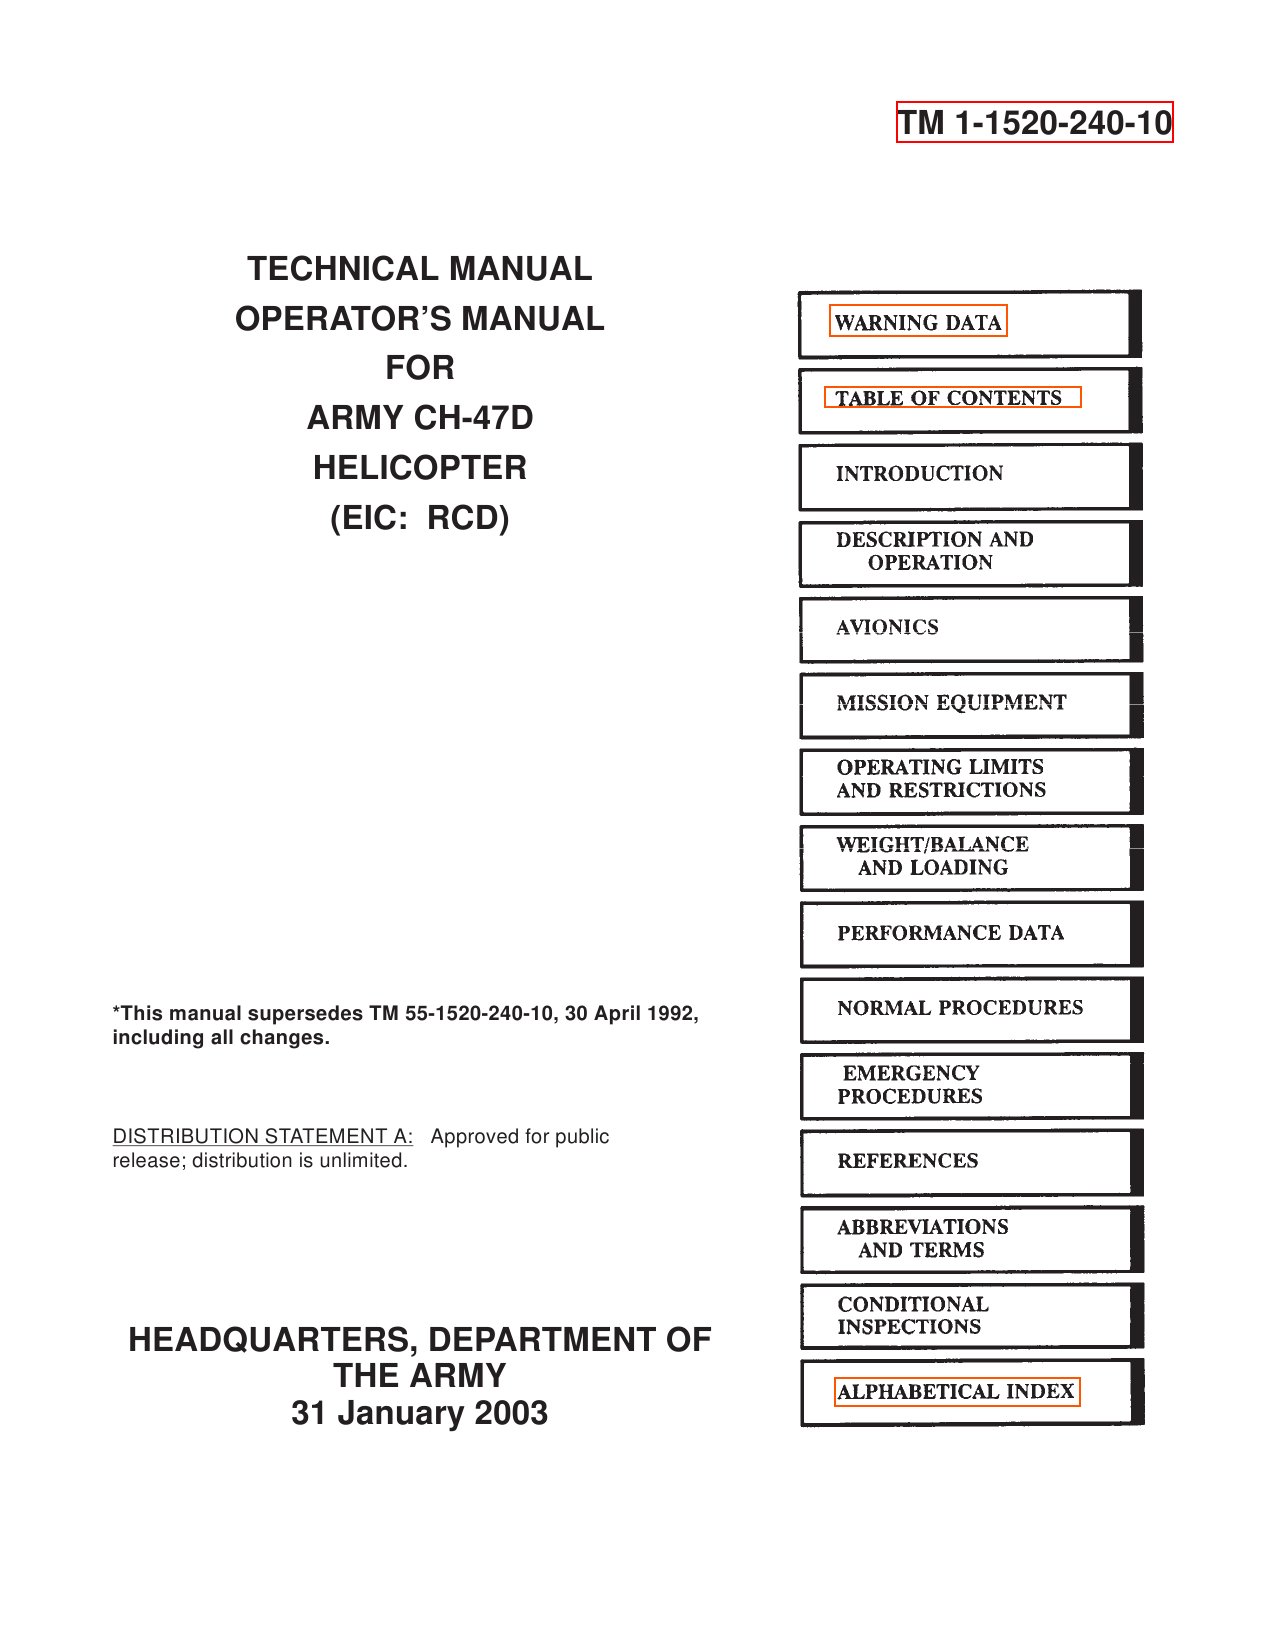 Boeing CH-47D Chinook Operator's Manual